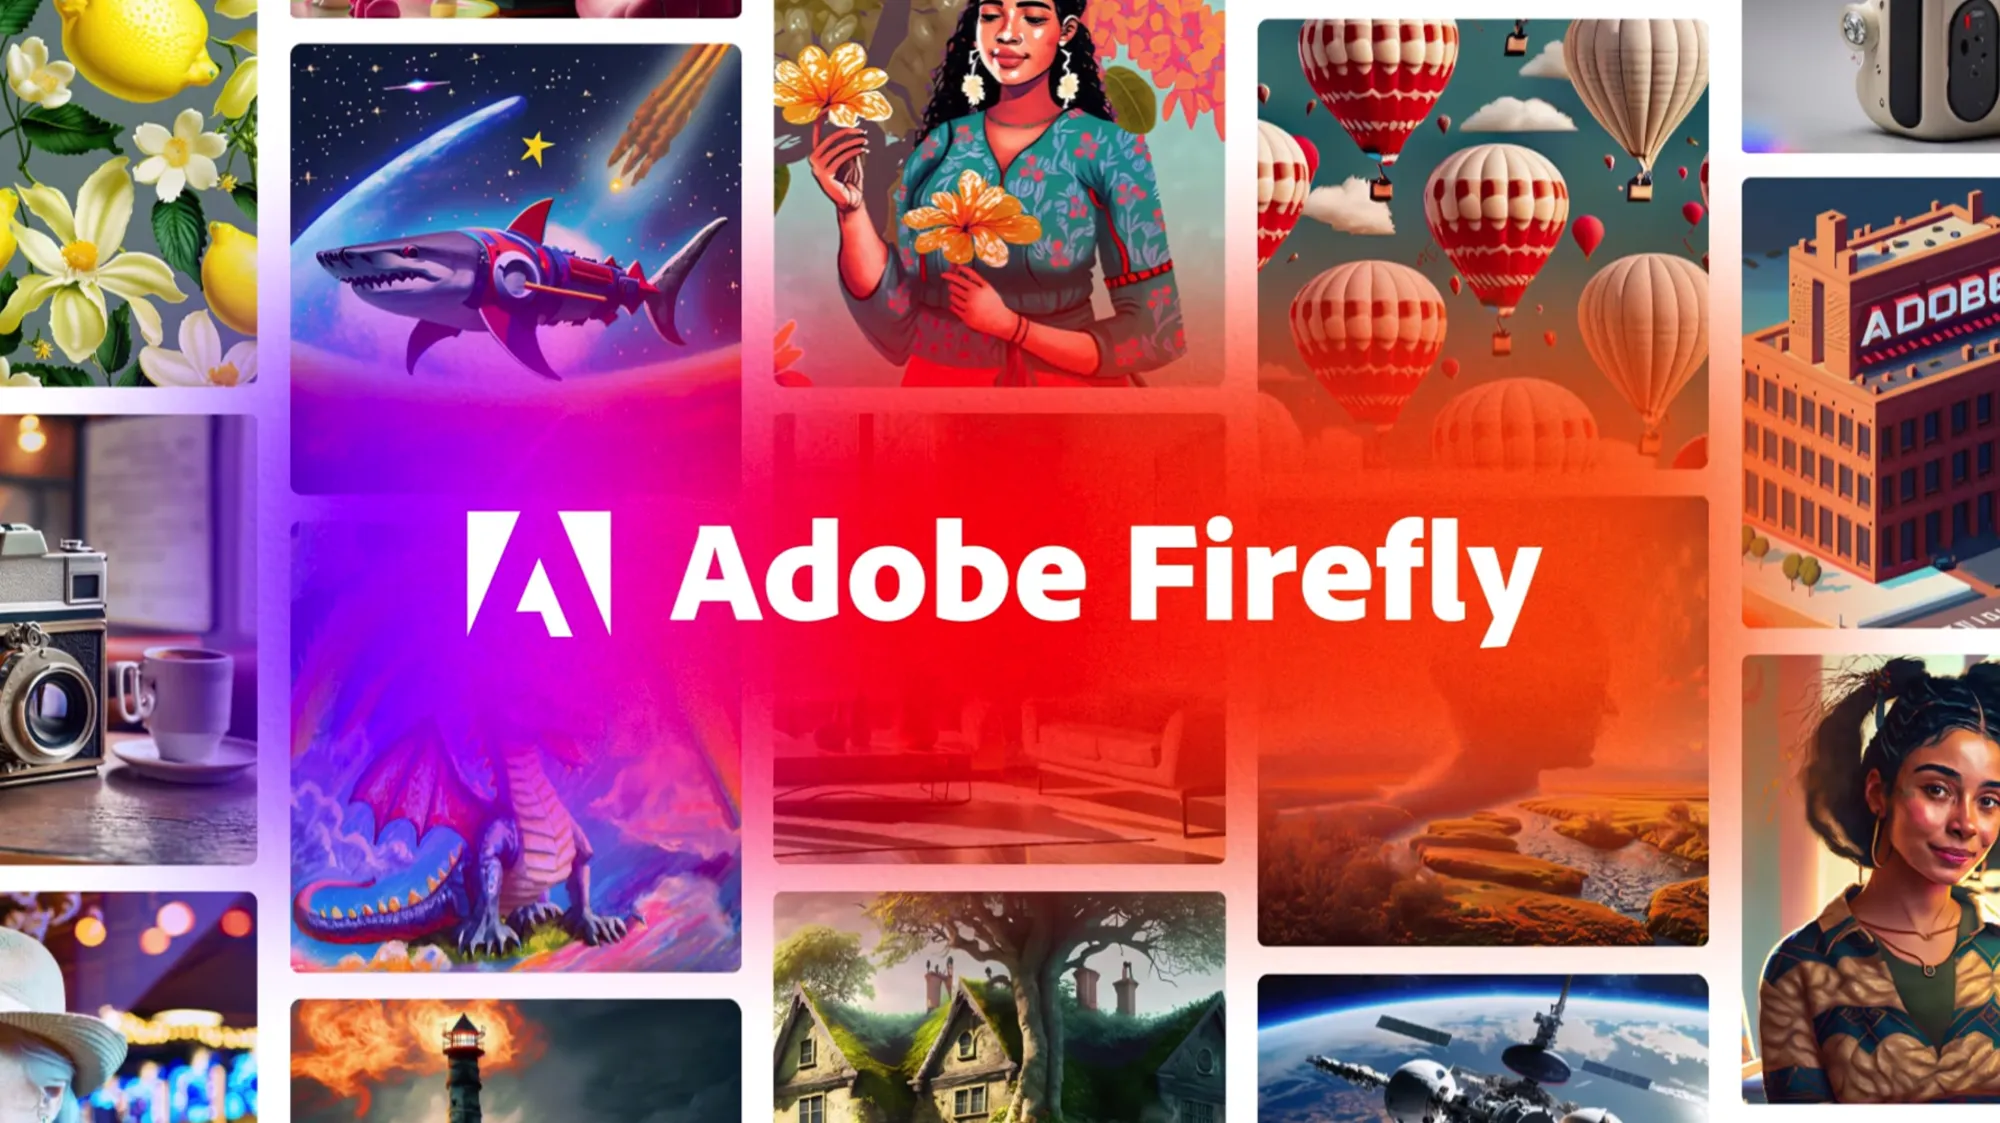 Adobe introduces Firefly, a family of new creative generative AI